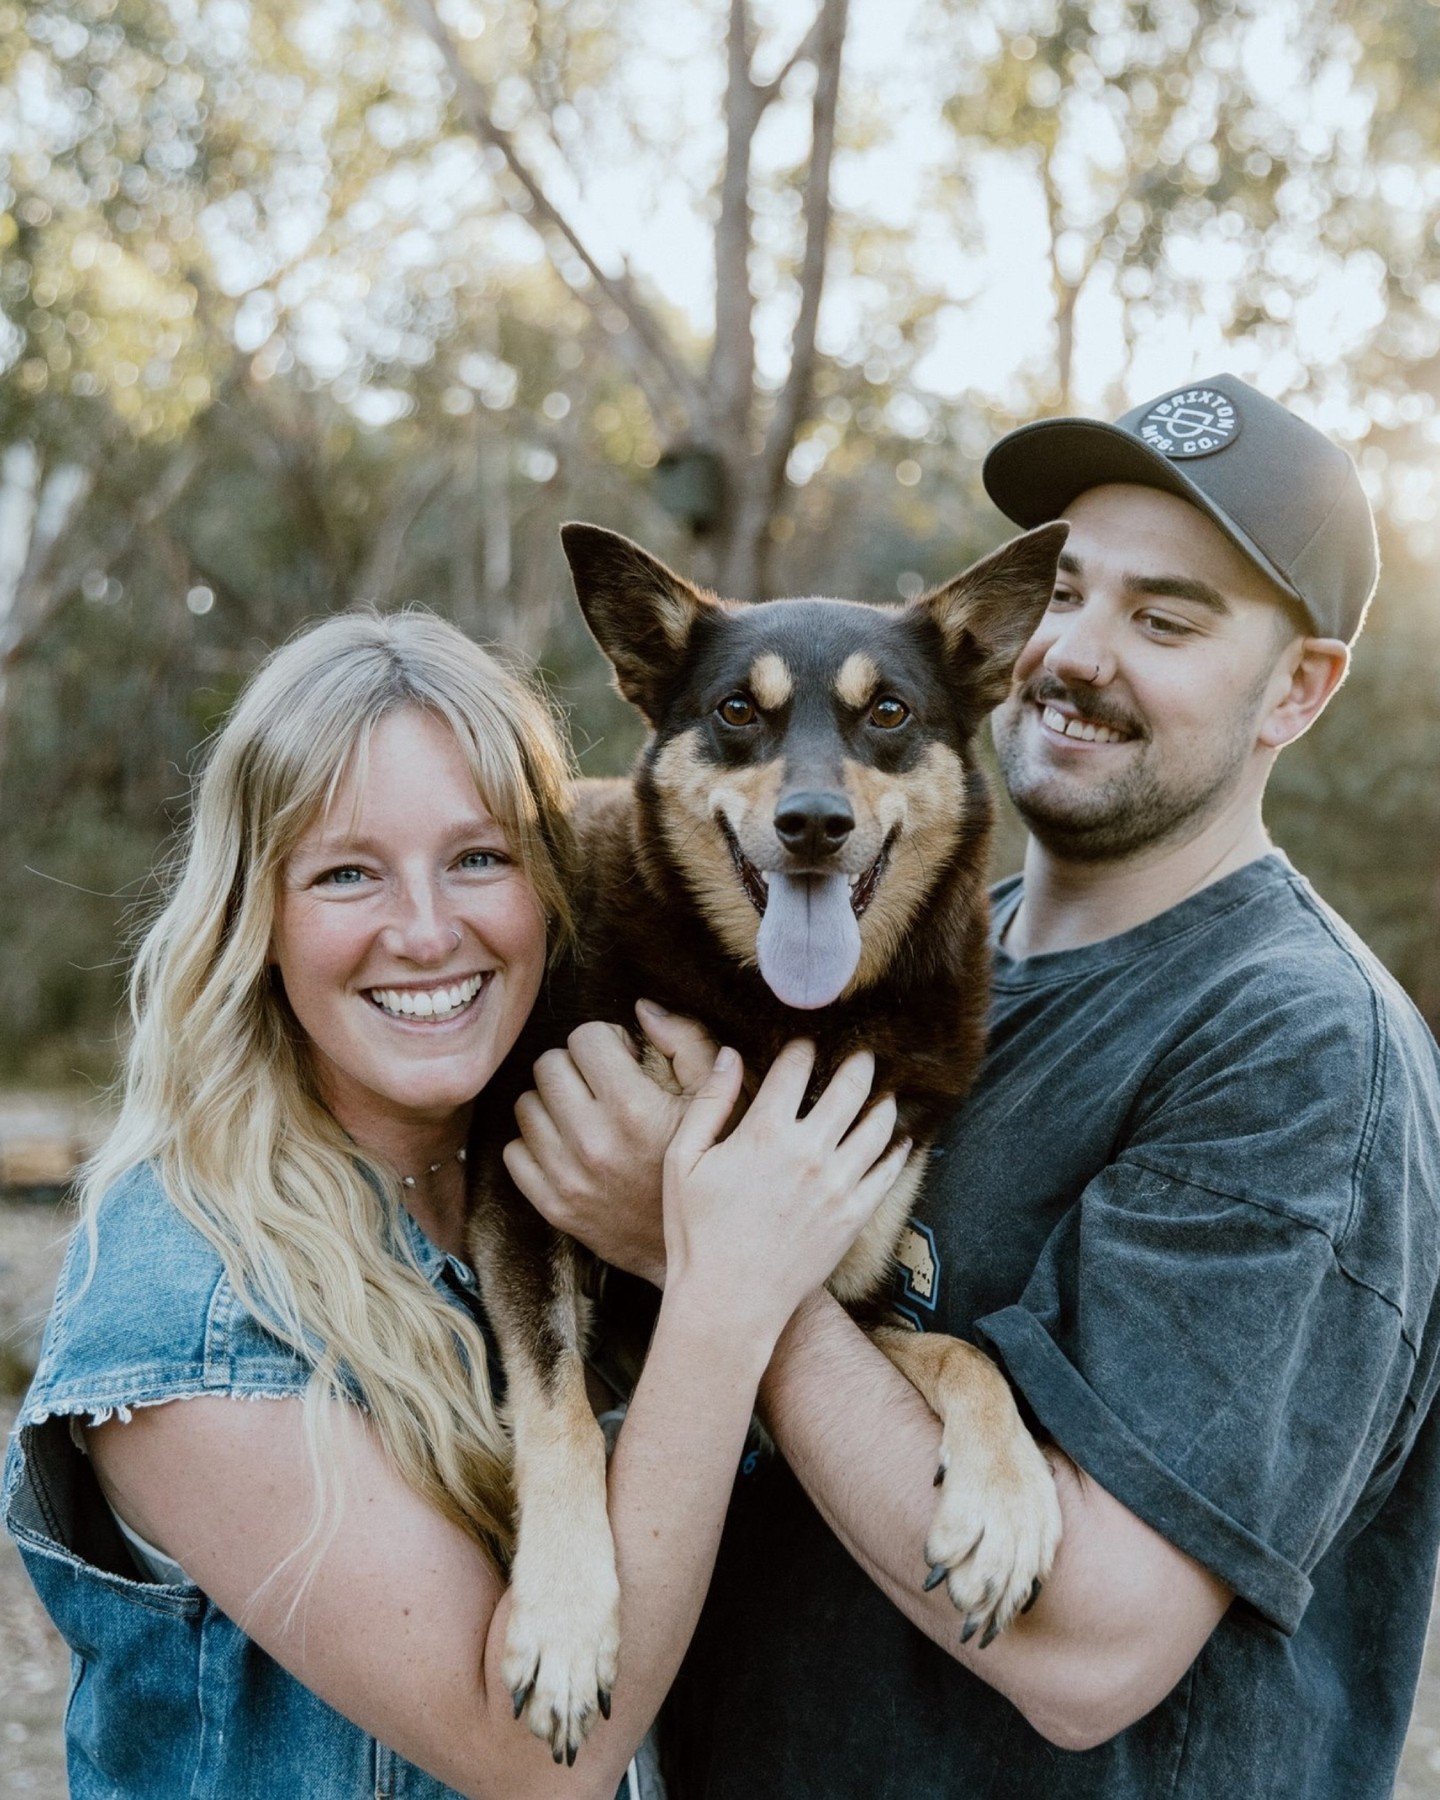 Chloe, Tom, and the fluffball Dusty bringing all the chaos and cuddles to this family photoshoot! 🐾

📸 Ready to capture your own unforgettable moments? Hit me up to book your session and let's make some magic together!